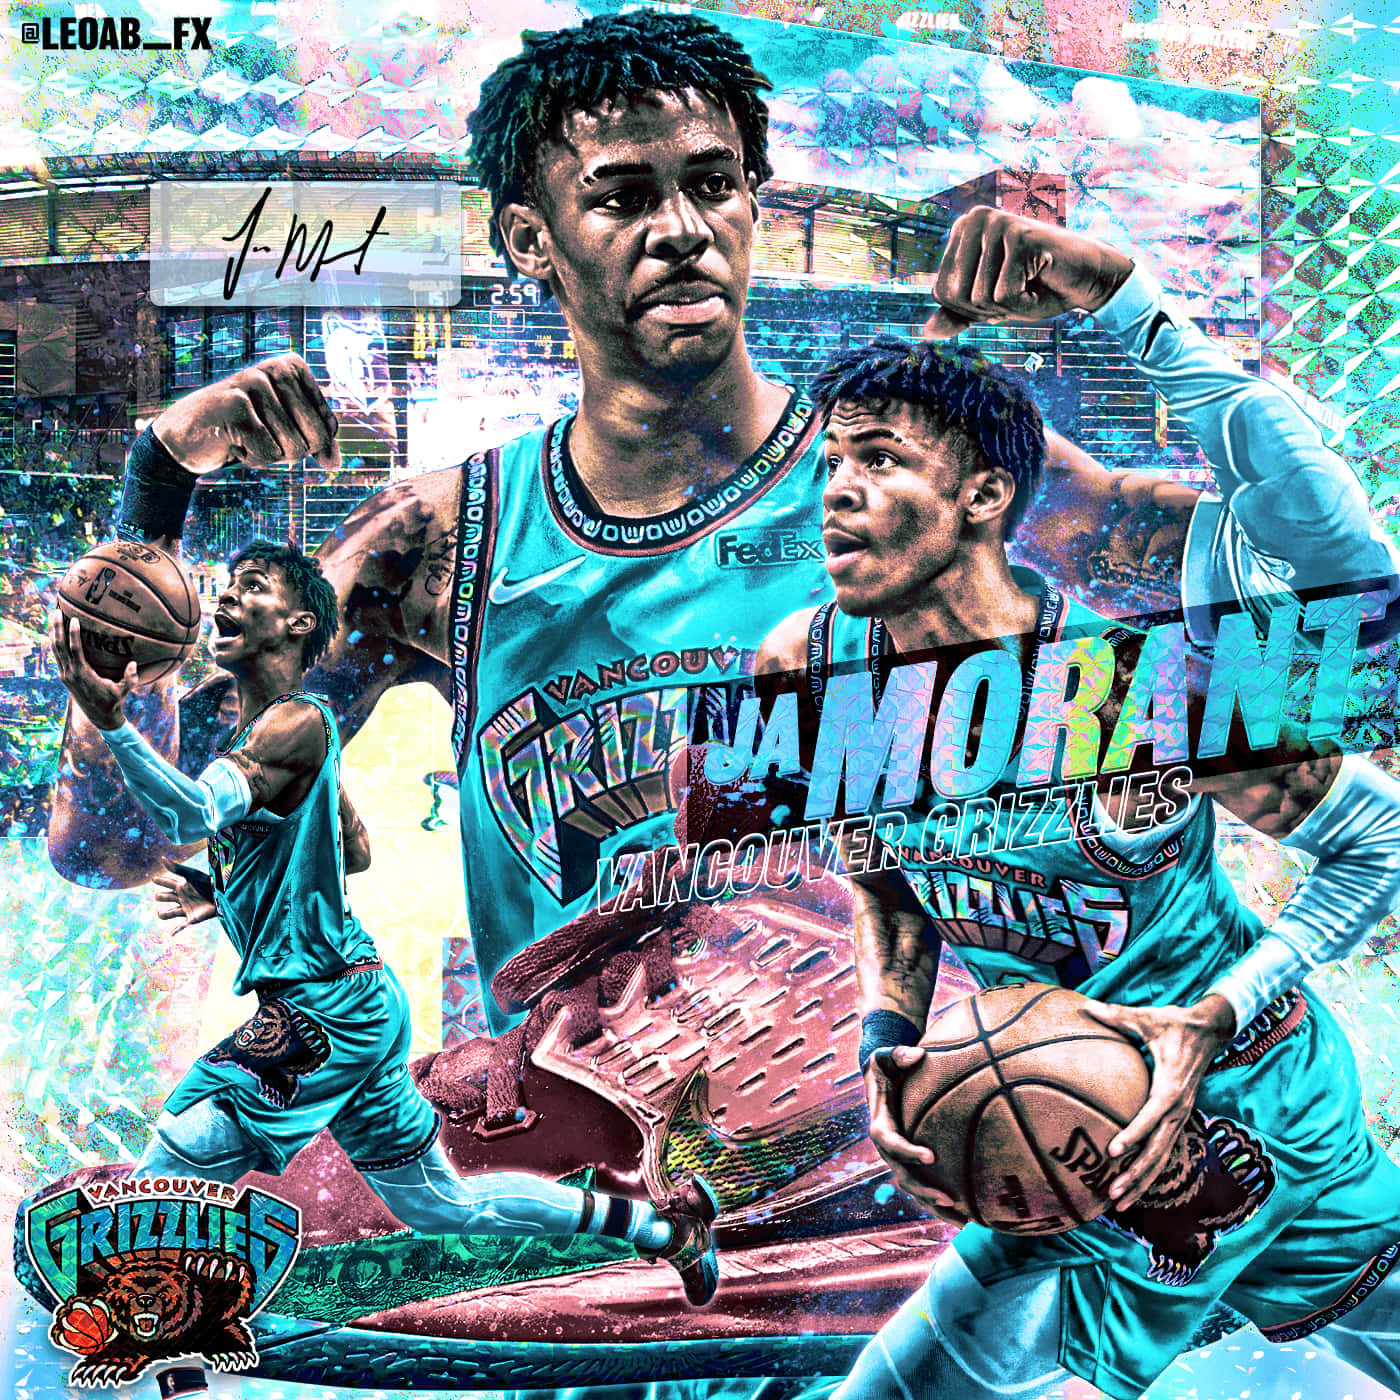 Quench your thirst for adventure with Ja Morrant! Wallpaper